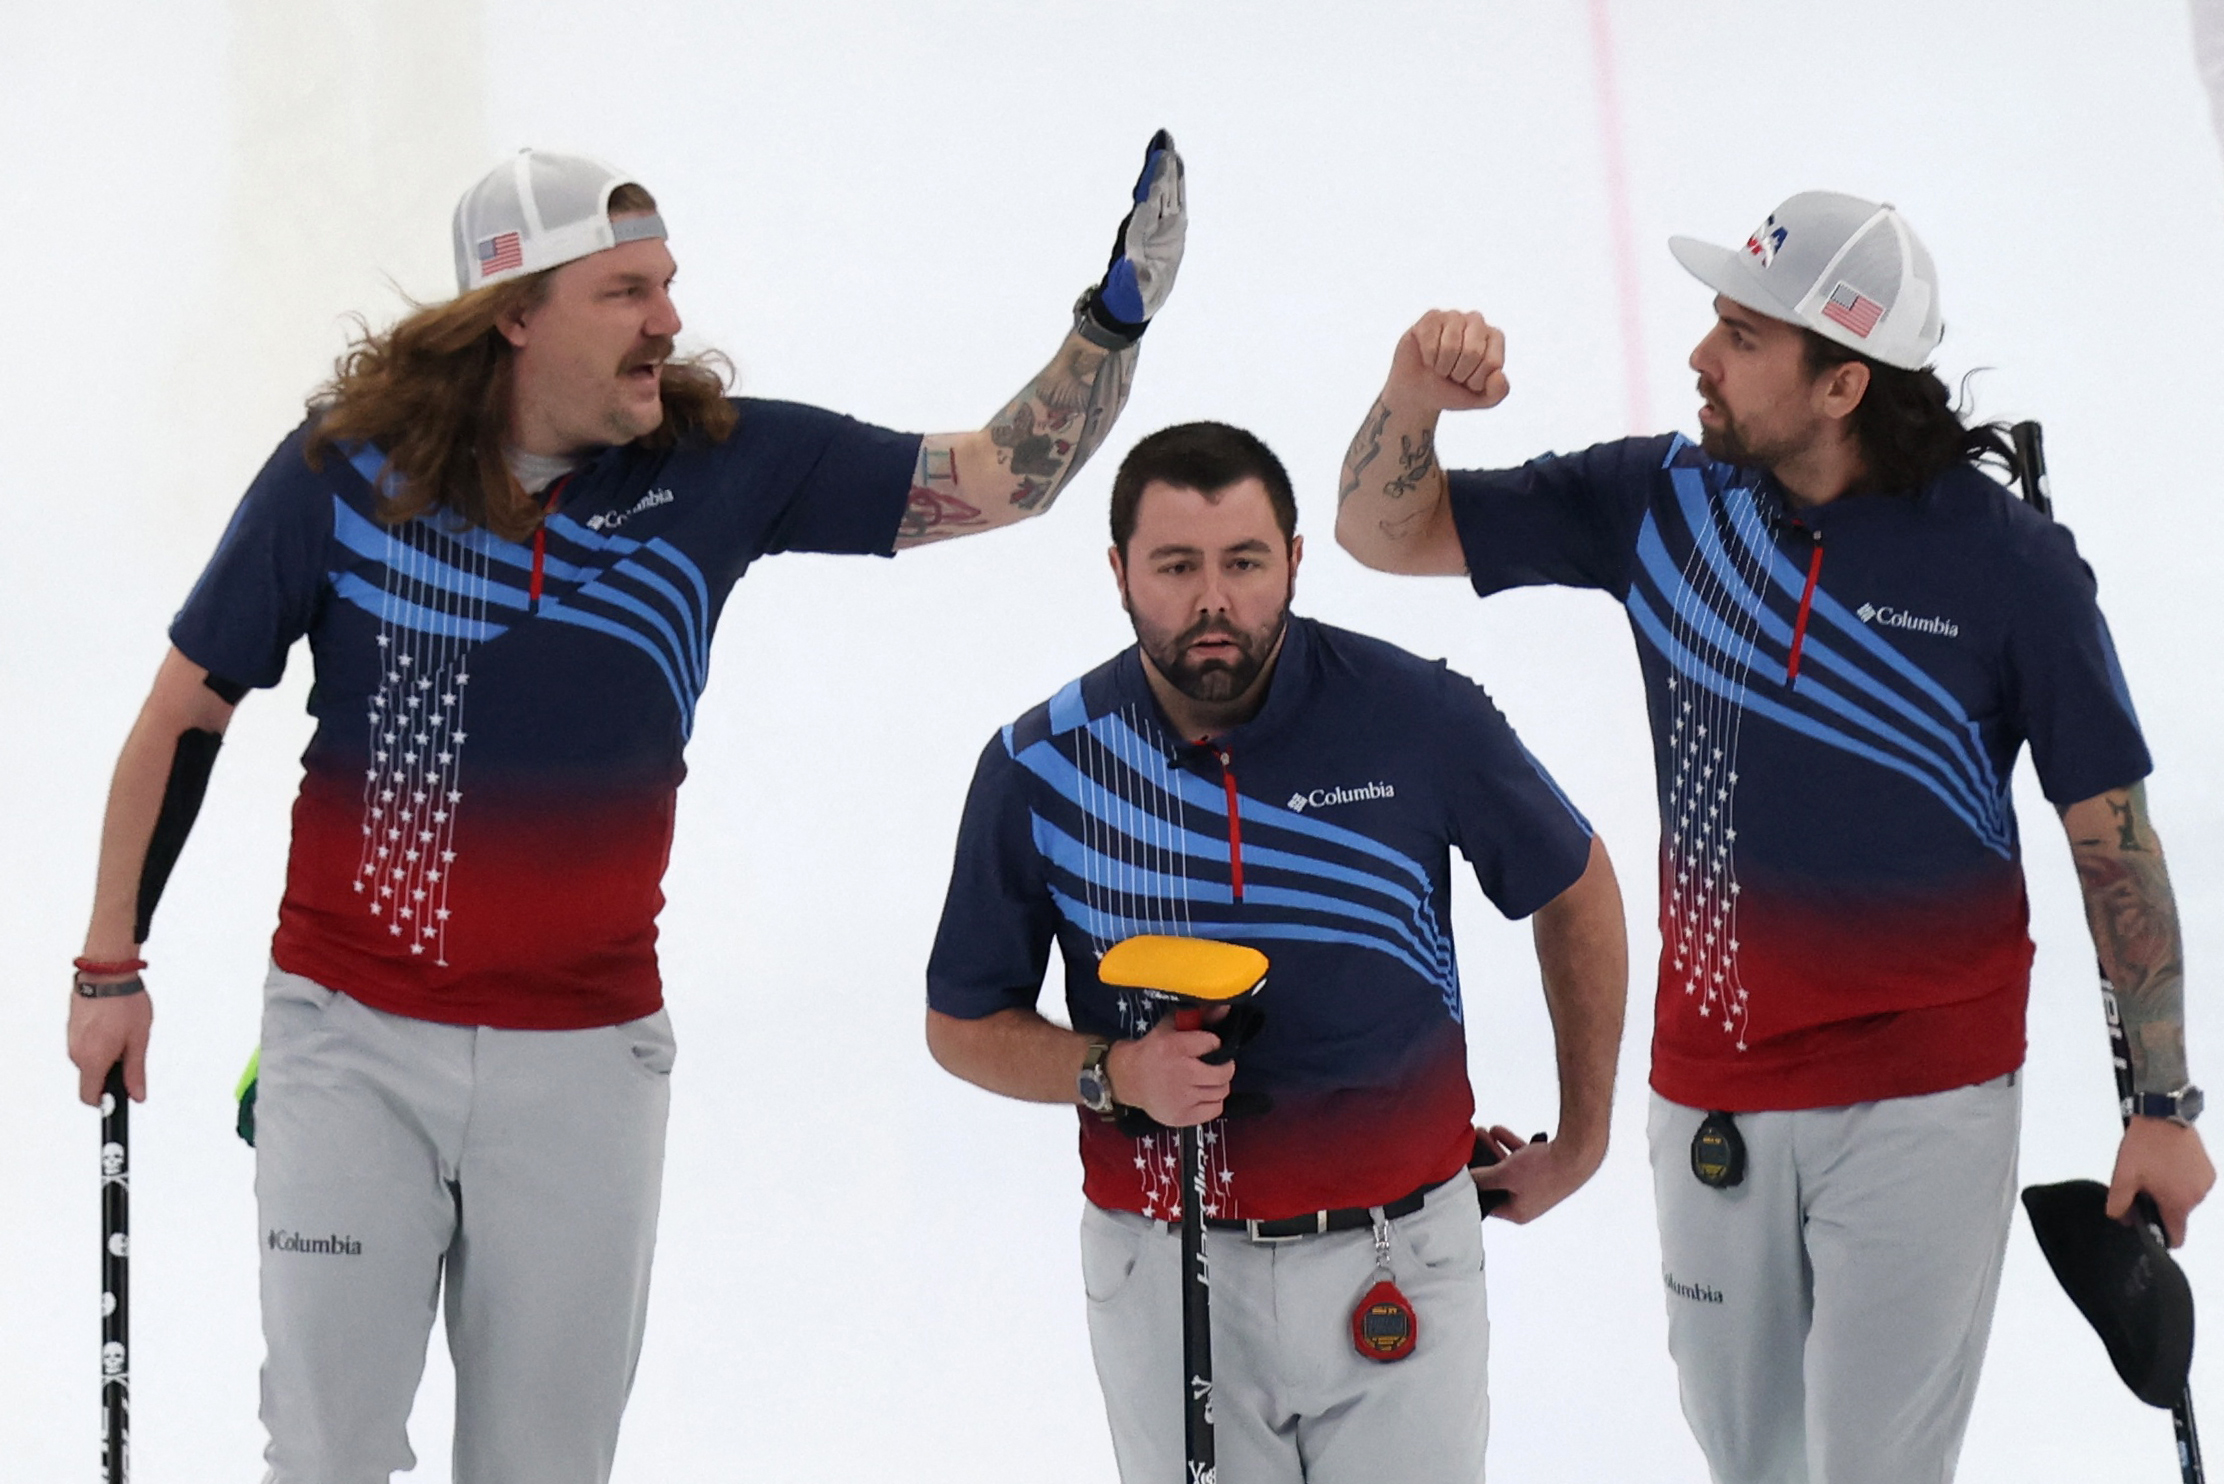 Curling Reigning Champions U S Off To Winning Start In Men S Event Reuters